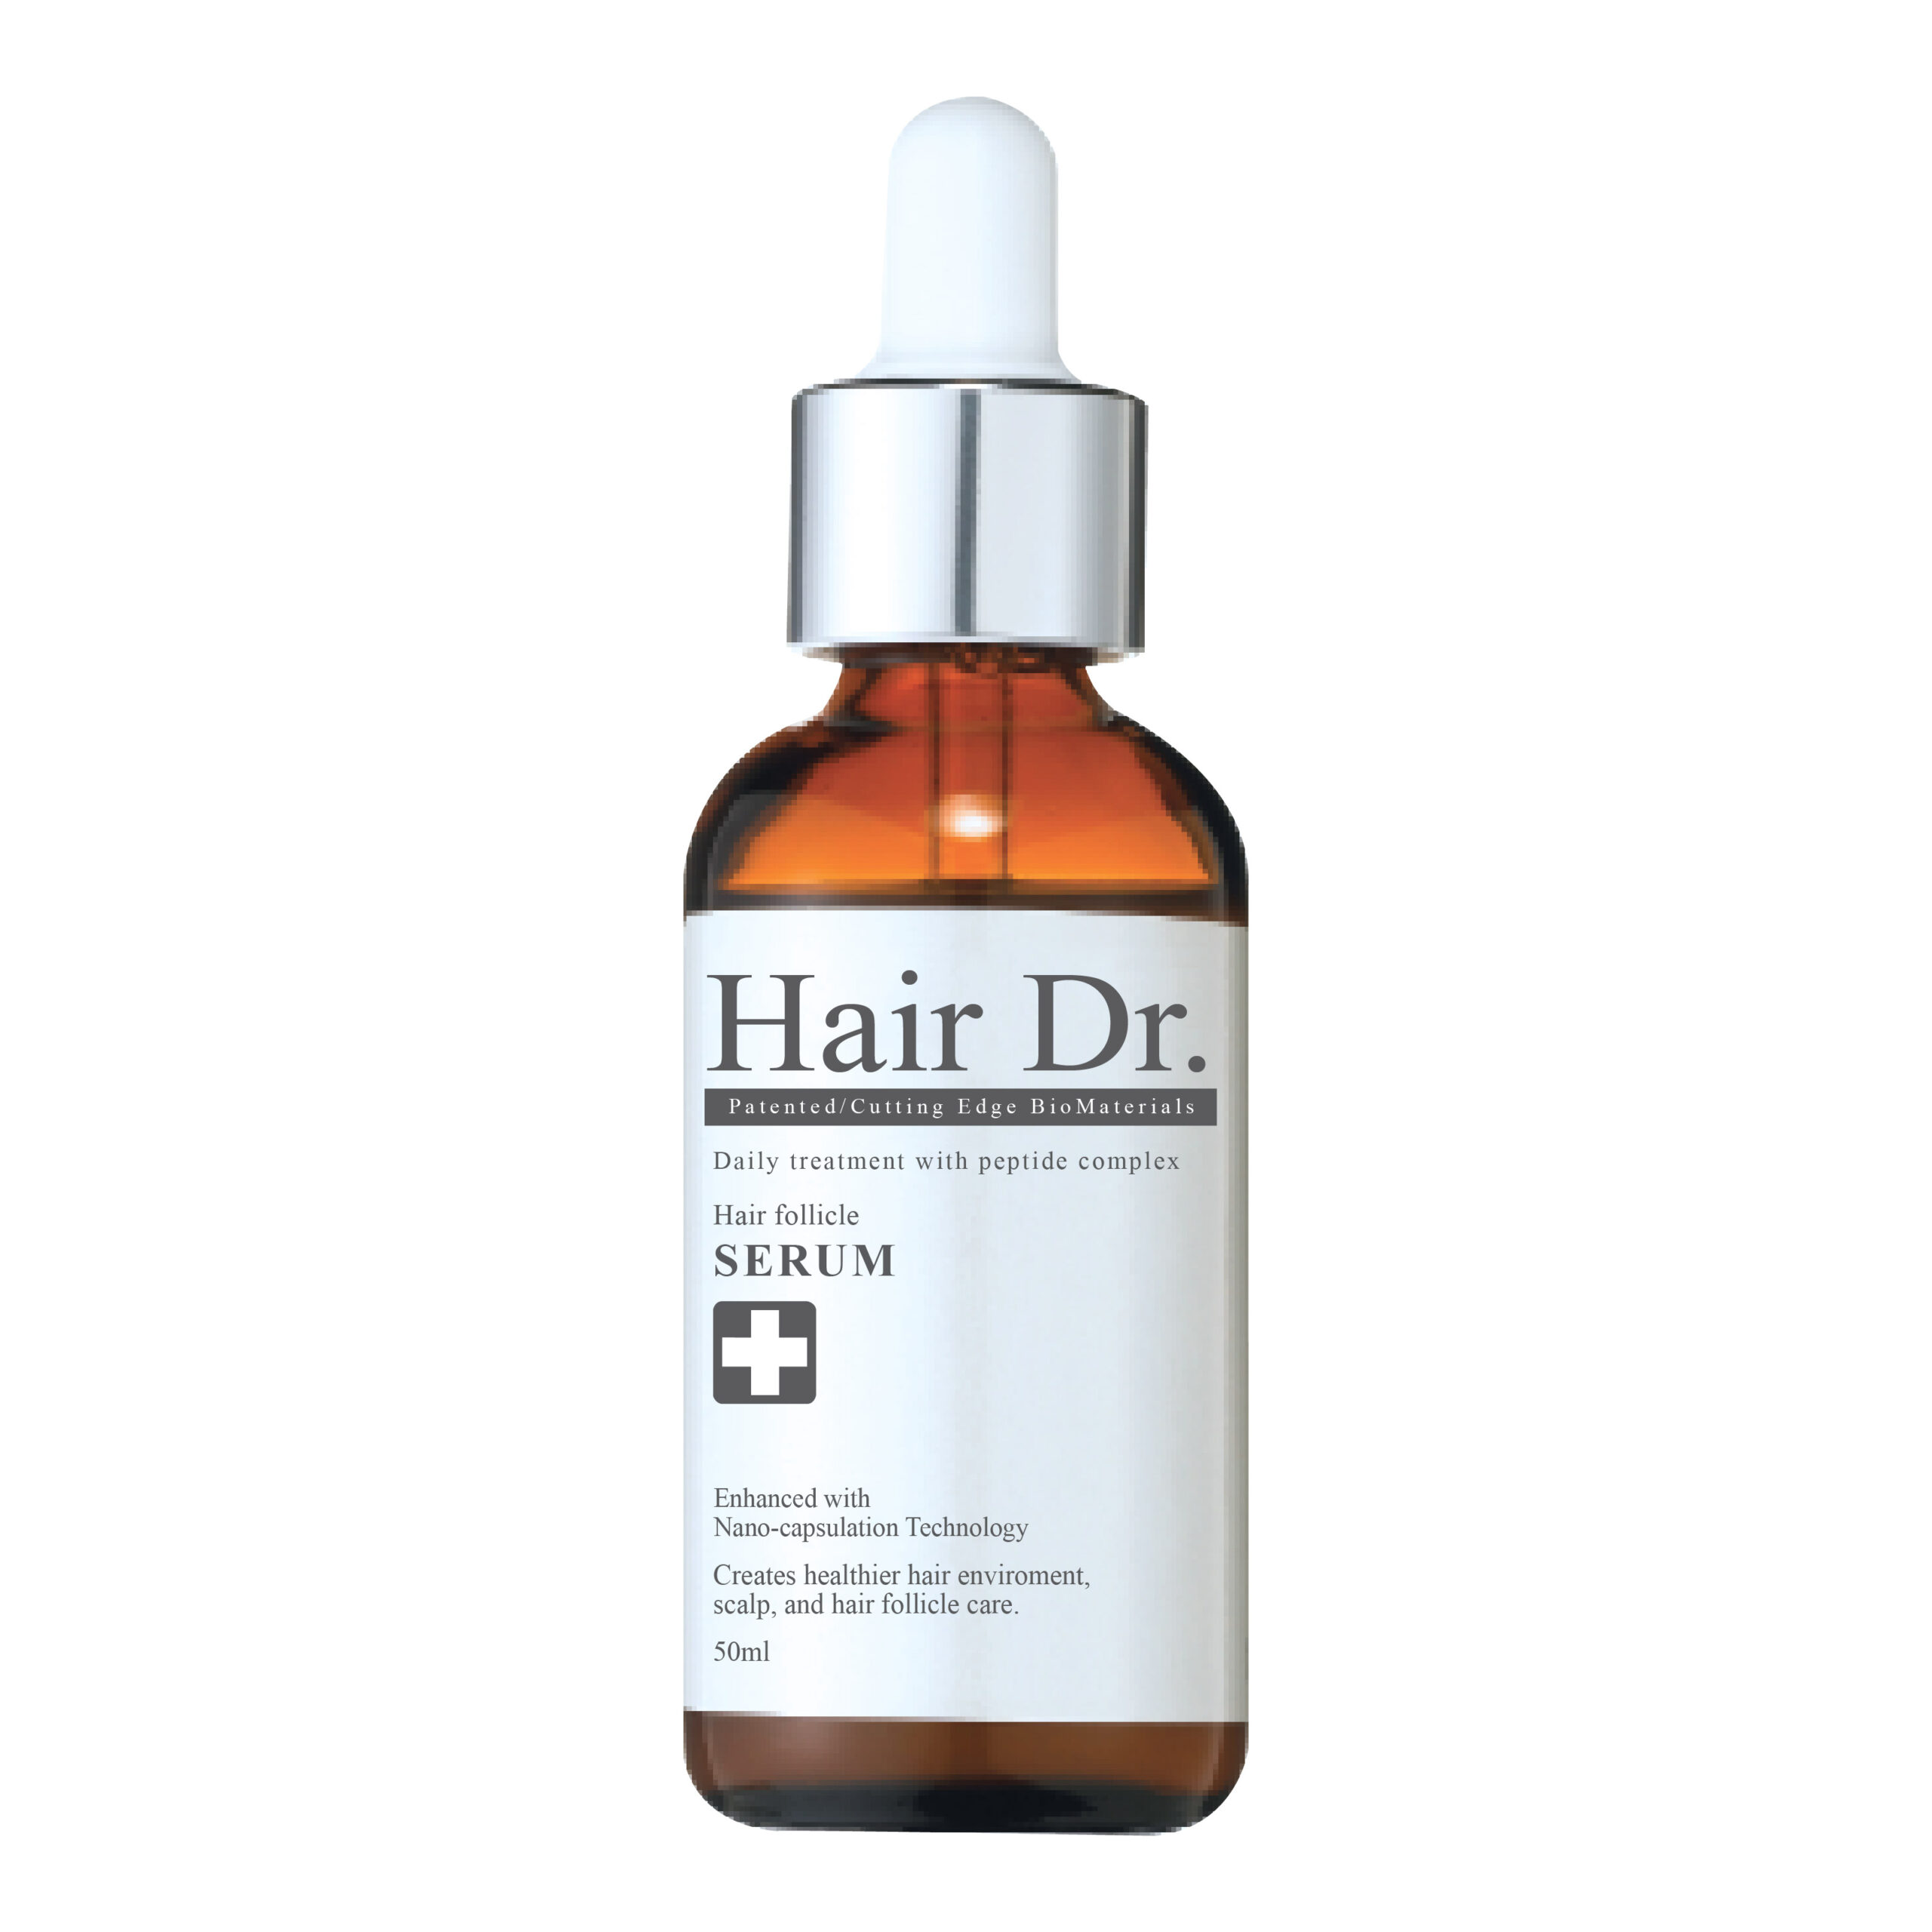 Featured image for “HAIR DR. FOLLICLE SERUM”